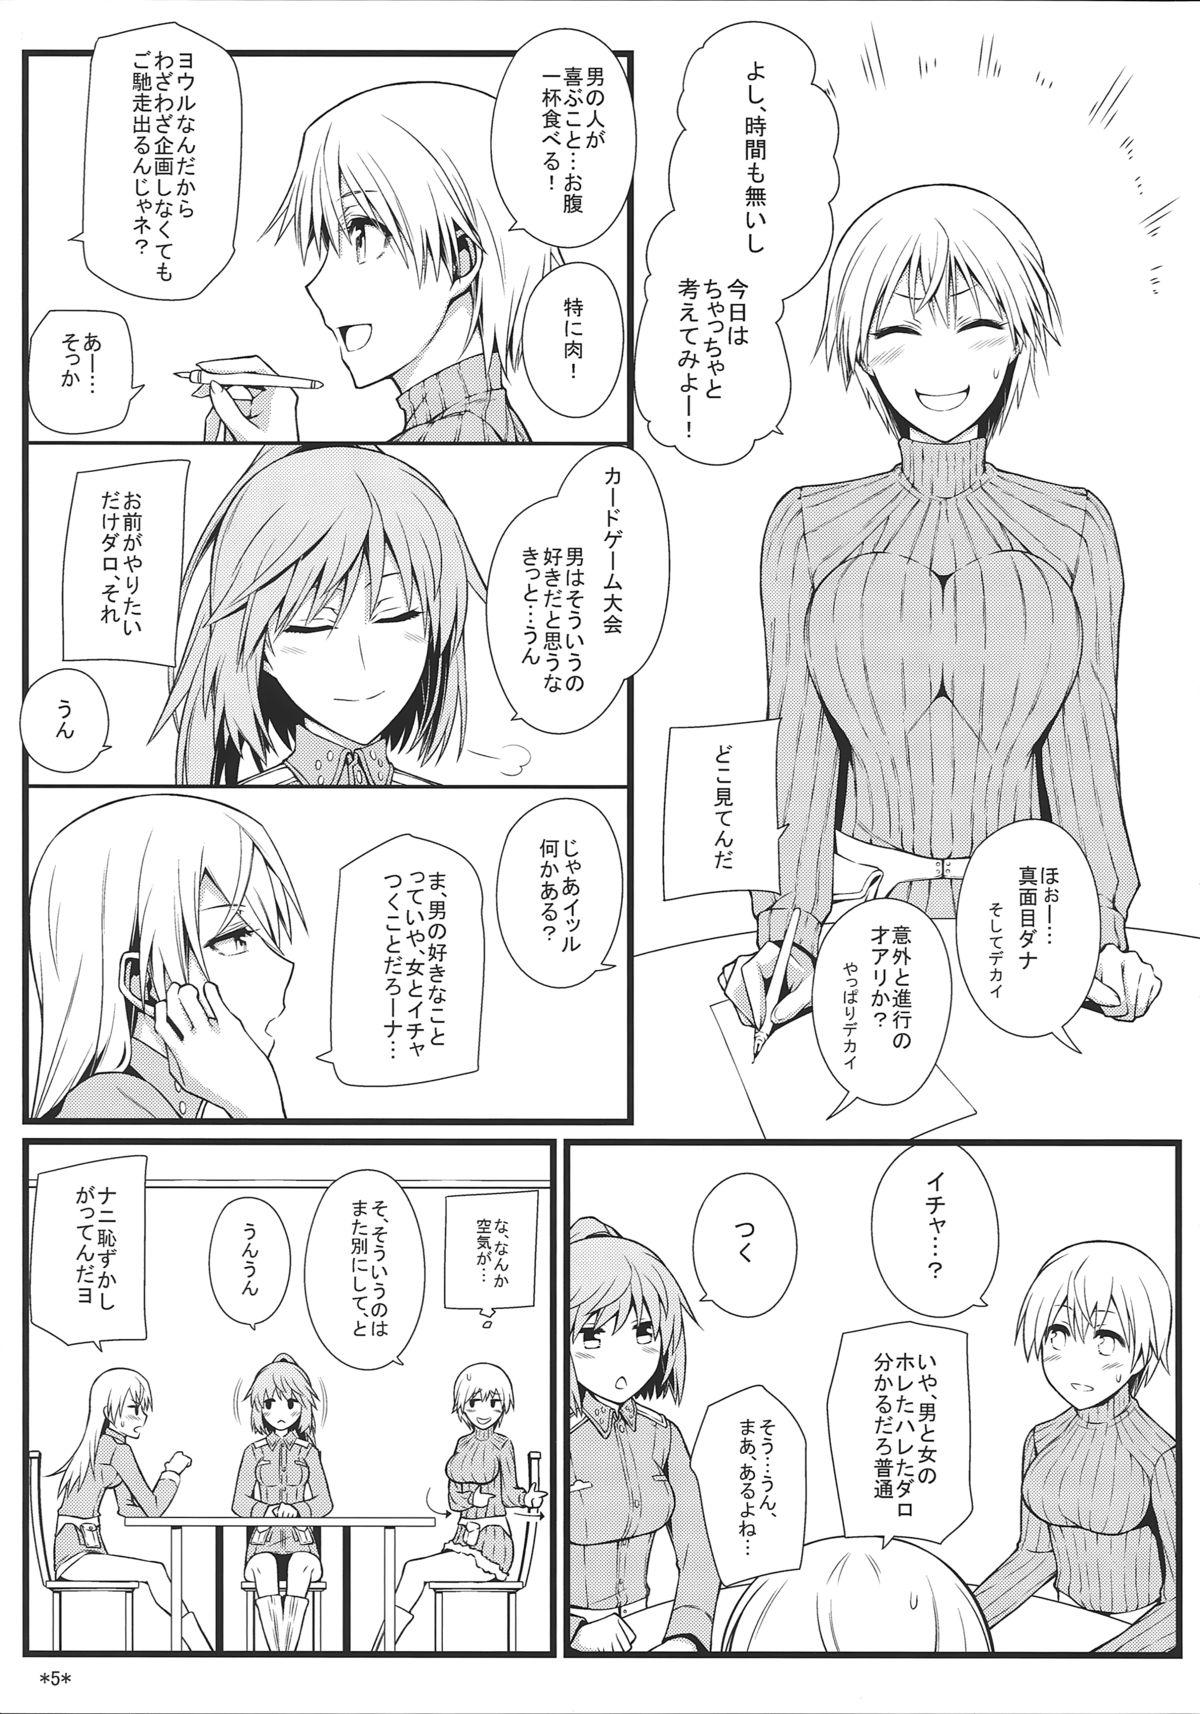 Lima KARLSLAND SYNDROME 3 - Strike witches Pregnant - Page 7